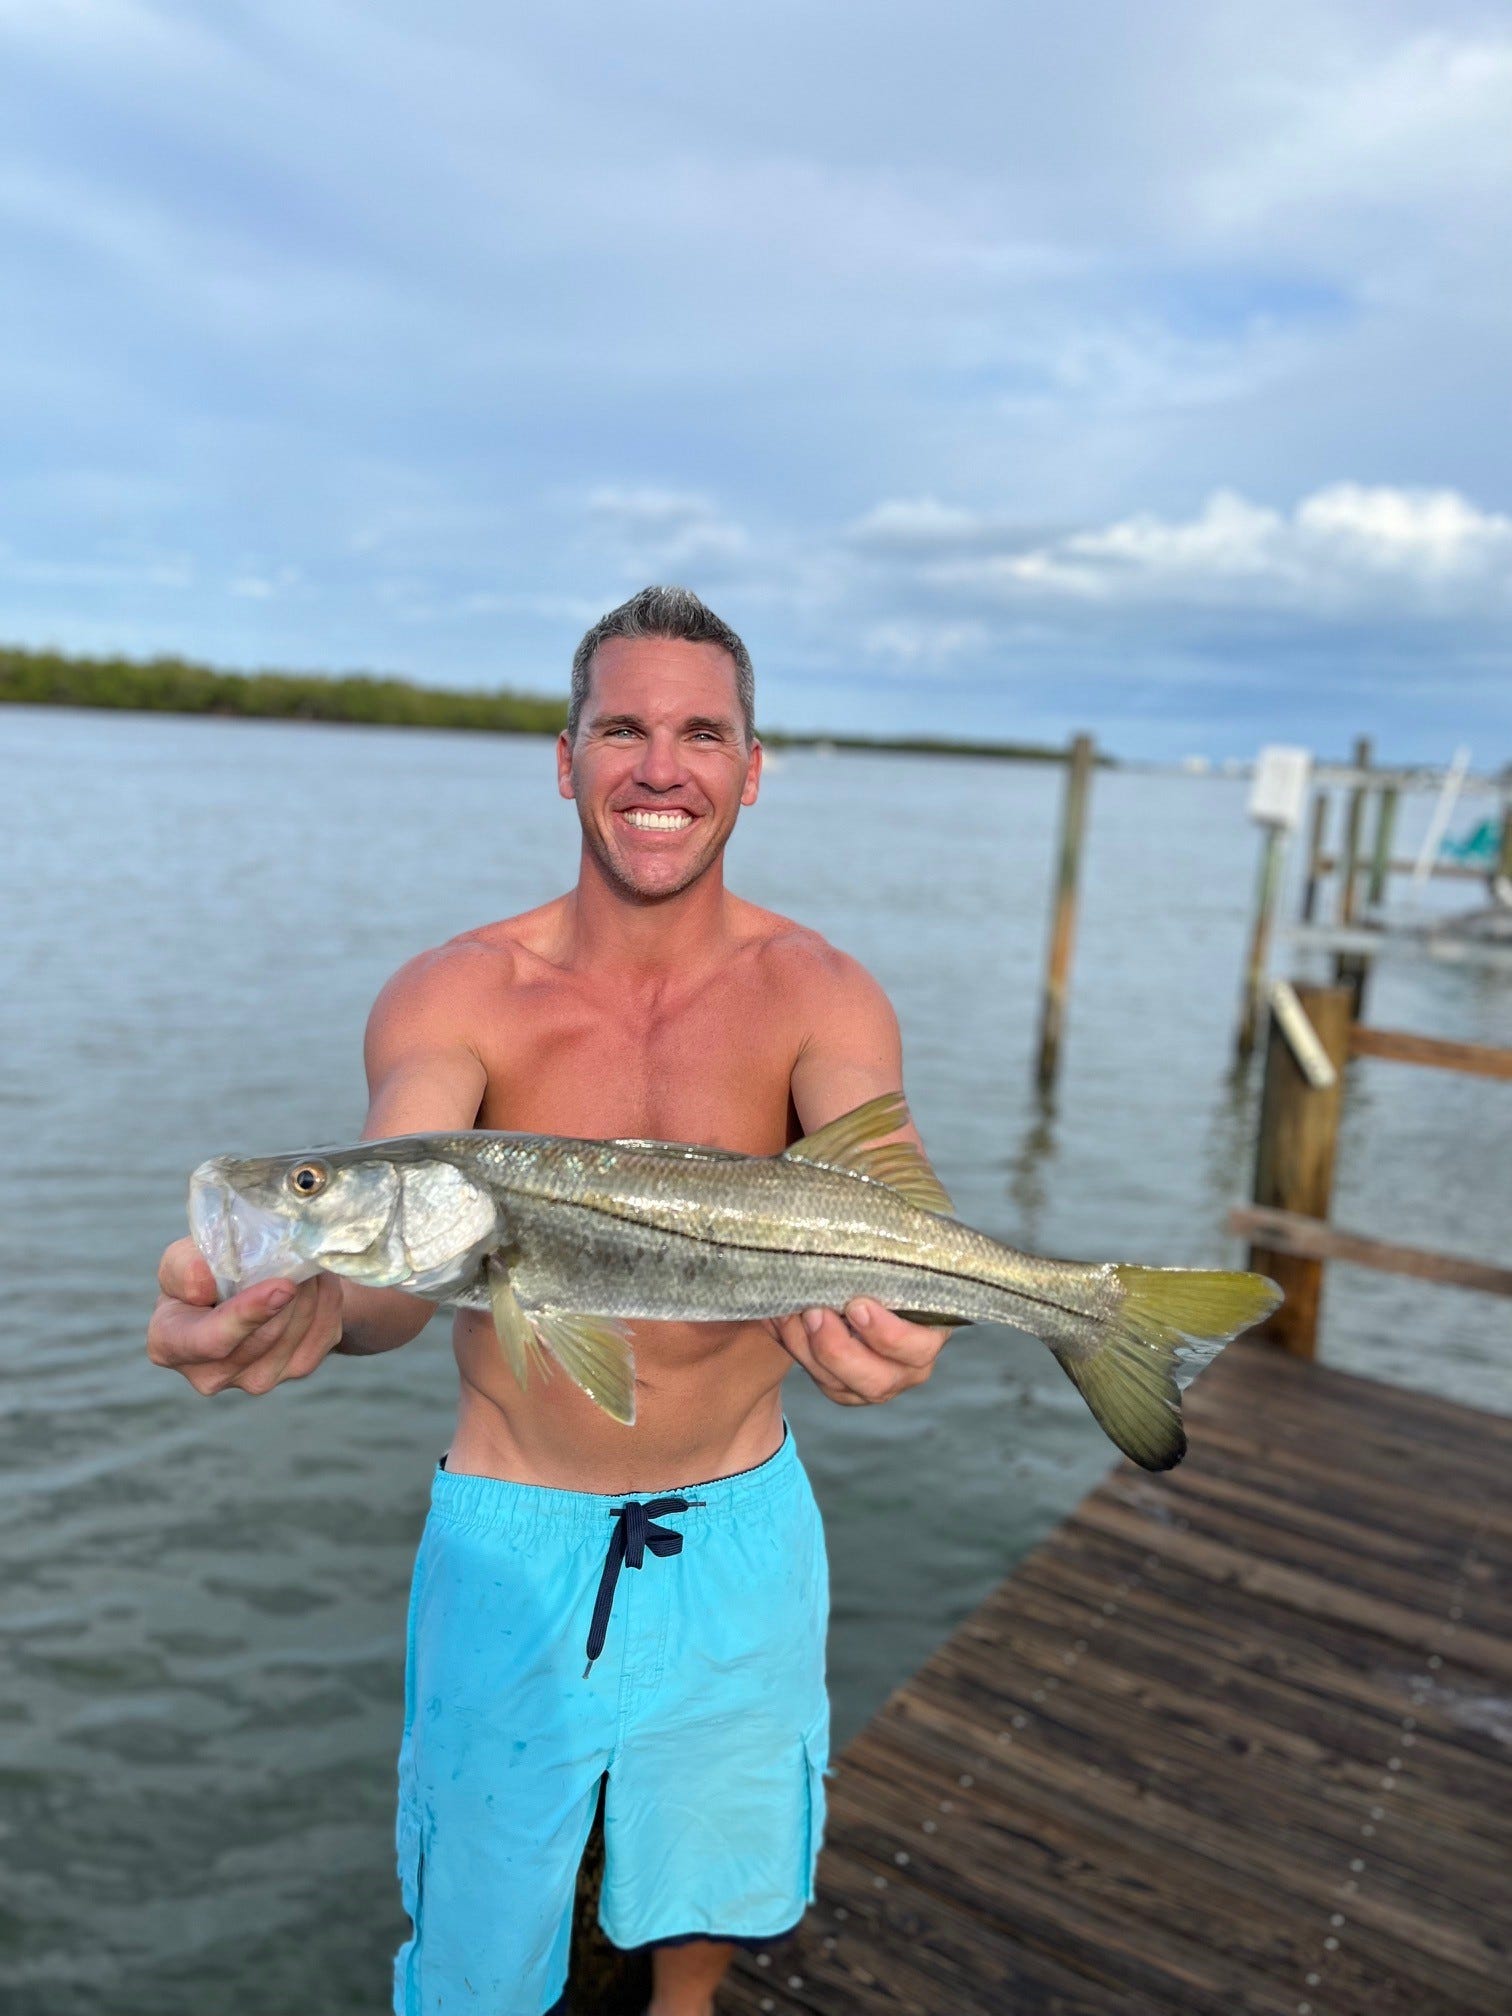 Mike Drumm shows off a snook he caught on the community dock on Hibiscus Drive in Fort Myers Beach in an image that was captured months before Hurricane Ian inundated the neighborhood and damaged the dock.